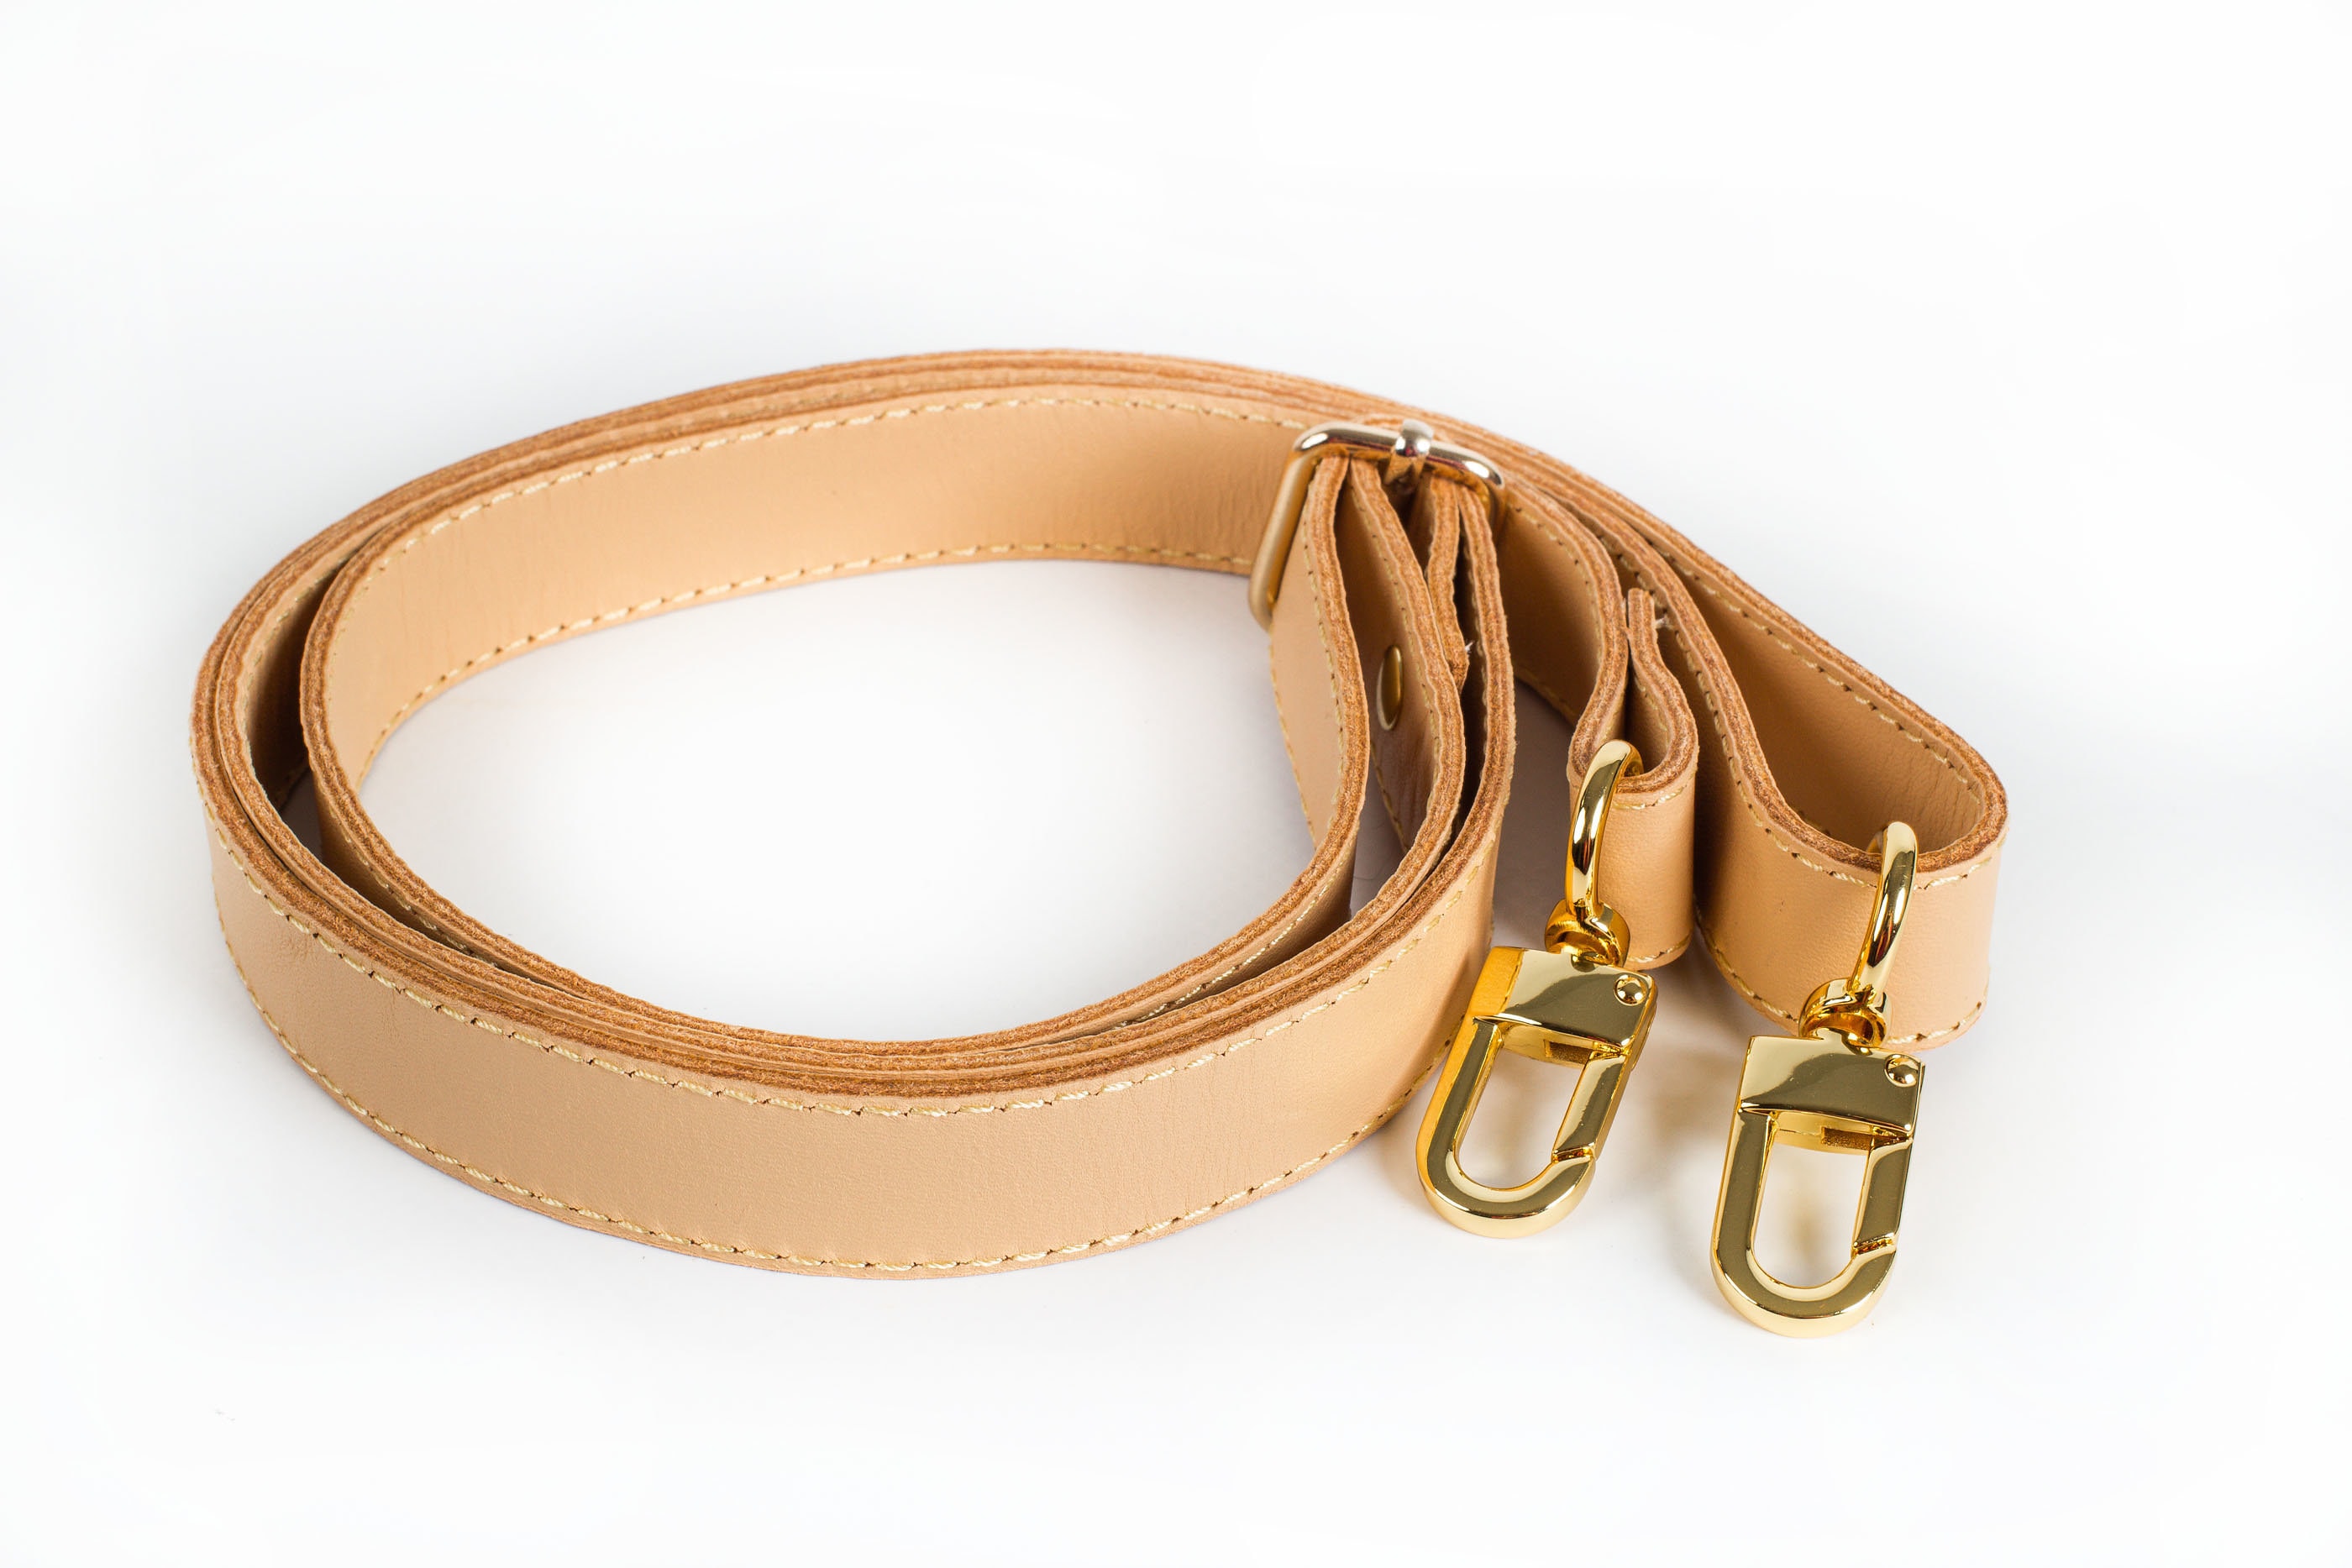 Leather Shoulder Strap with Double-sided Tan Leather 3/4 wide